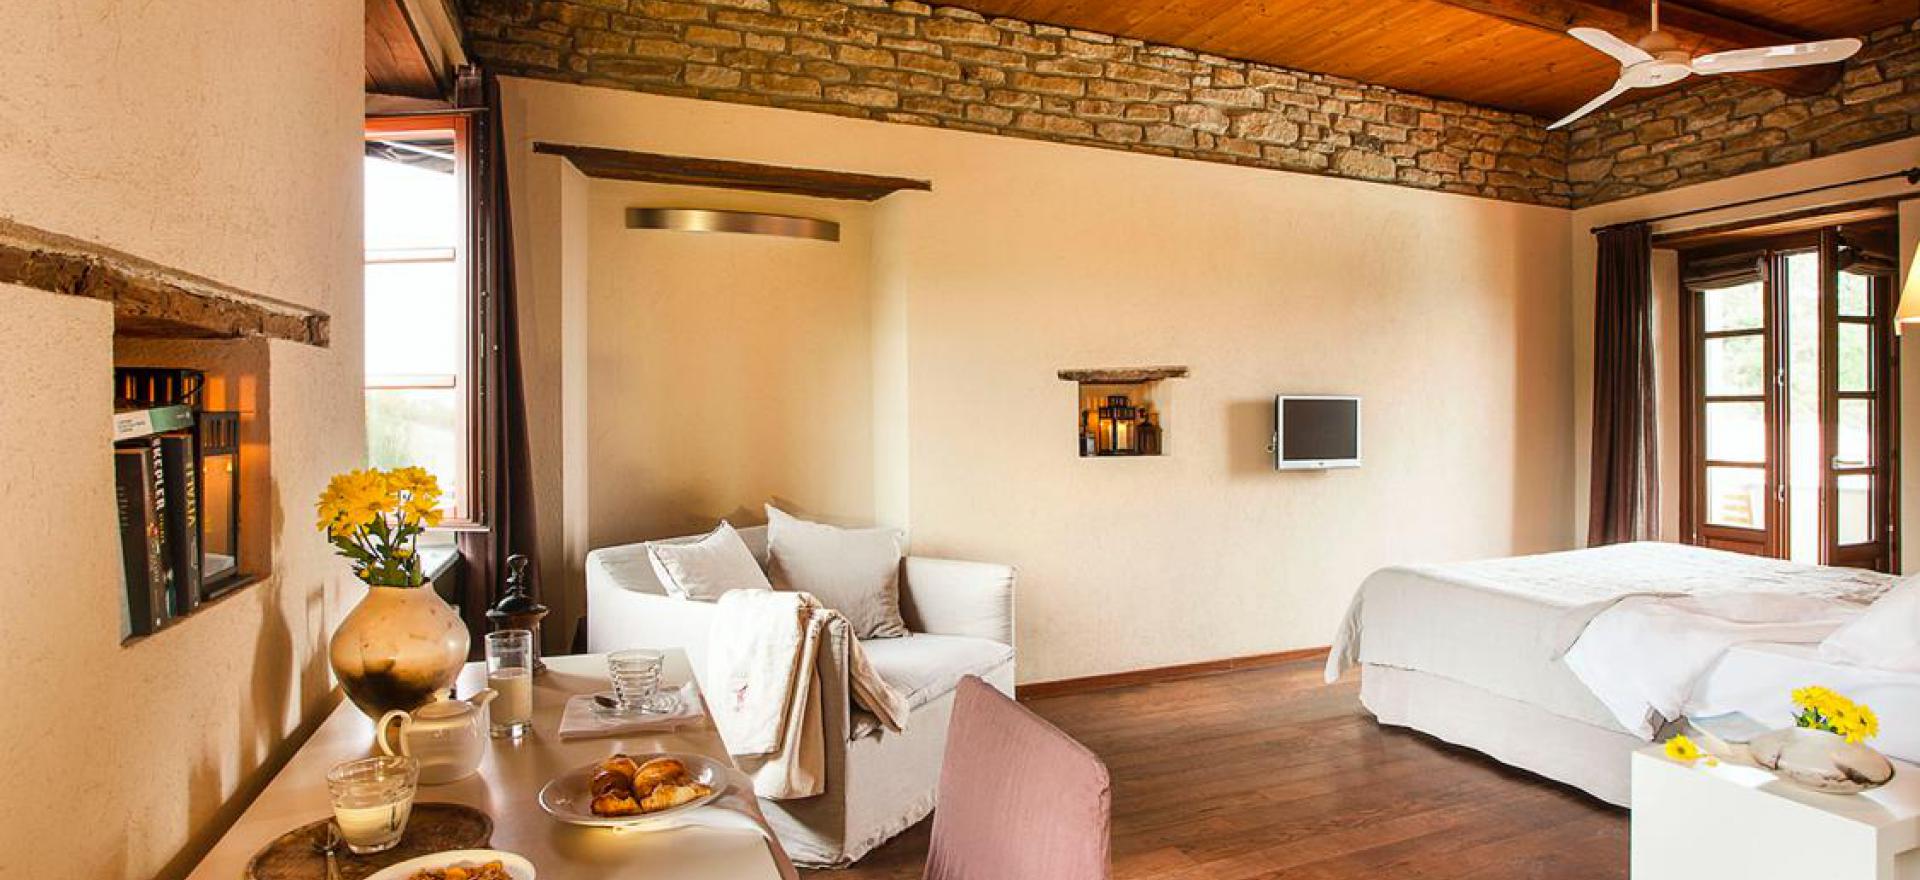 Agriturismo Piedmont Agriturismo in the heart of Piemonte for pure relaxation